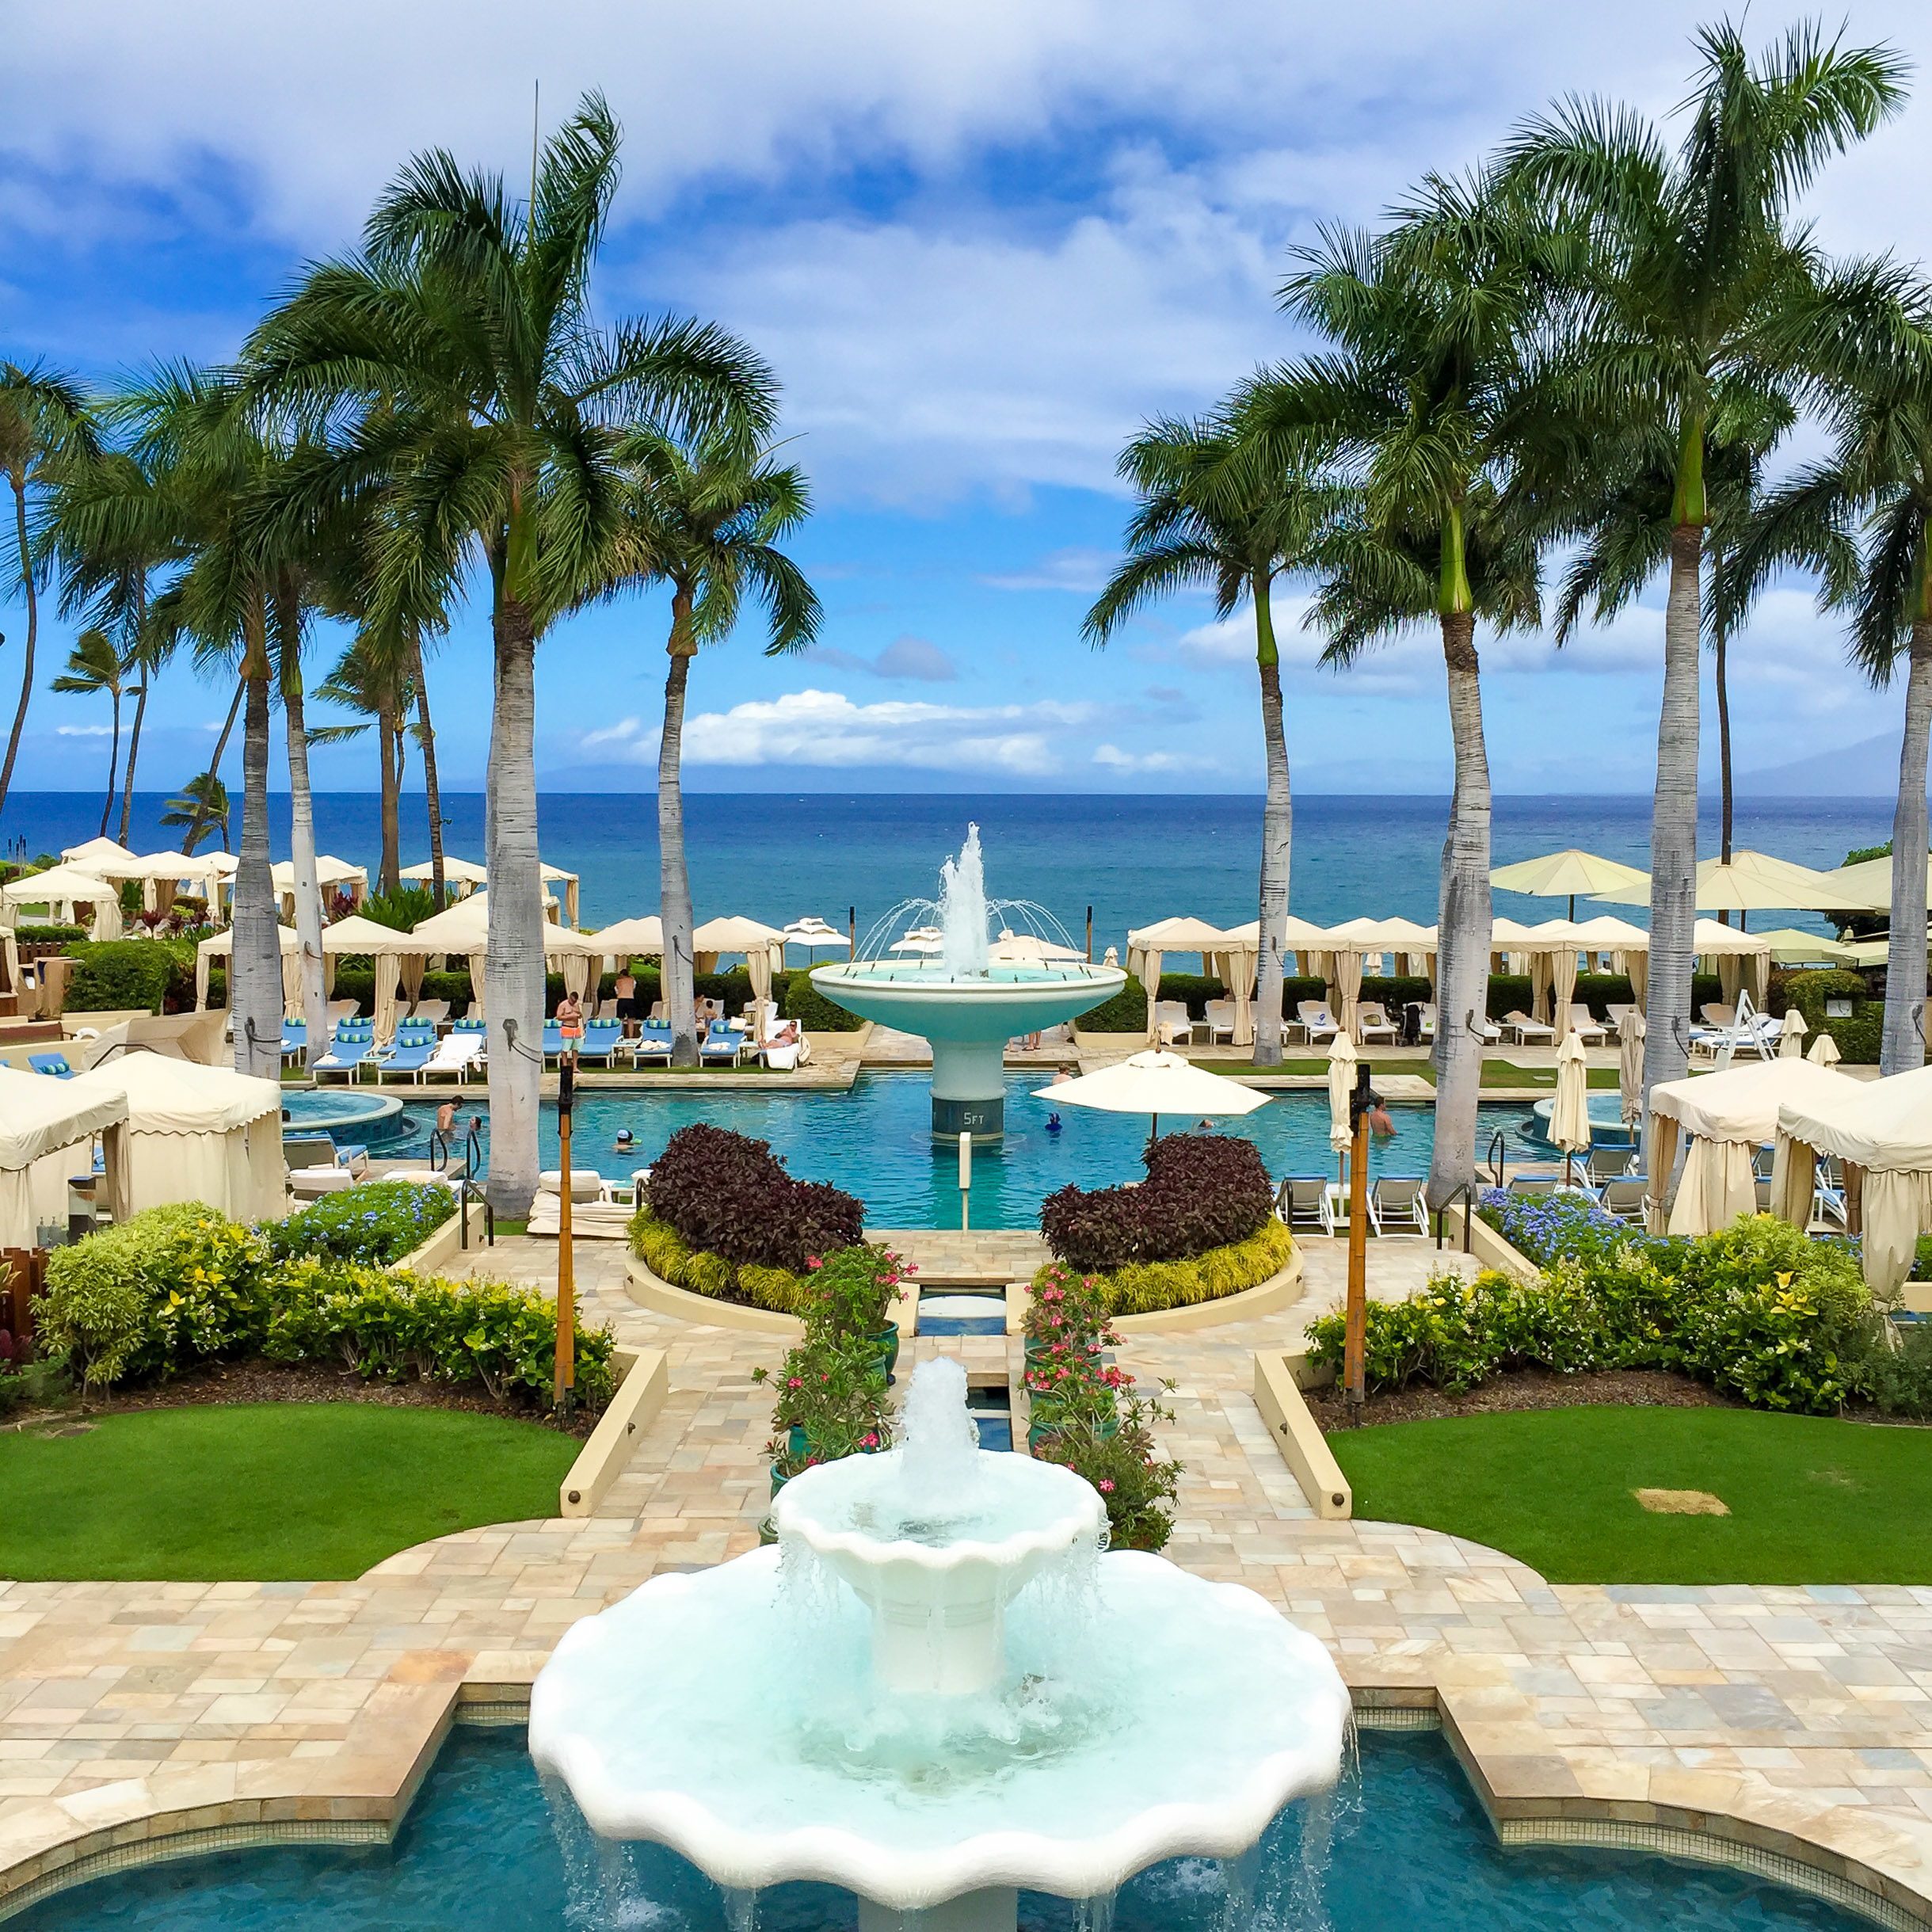 30+ Best Place To Stay In Maui: Best Areas & Hotels